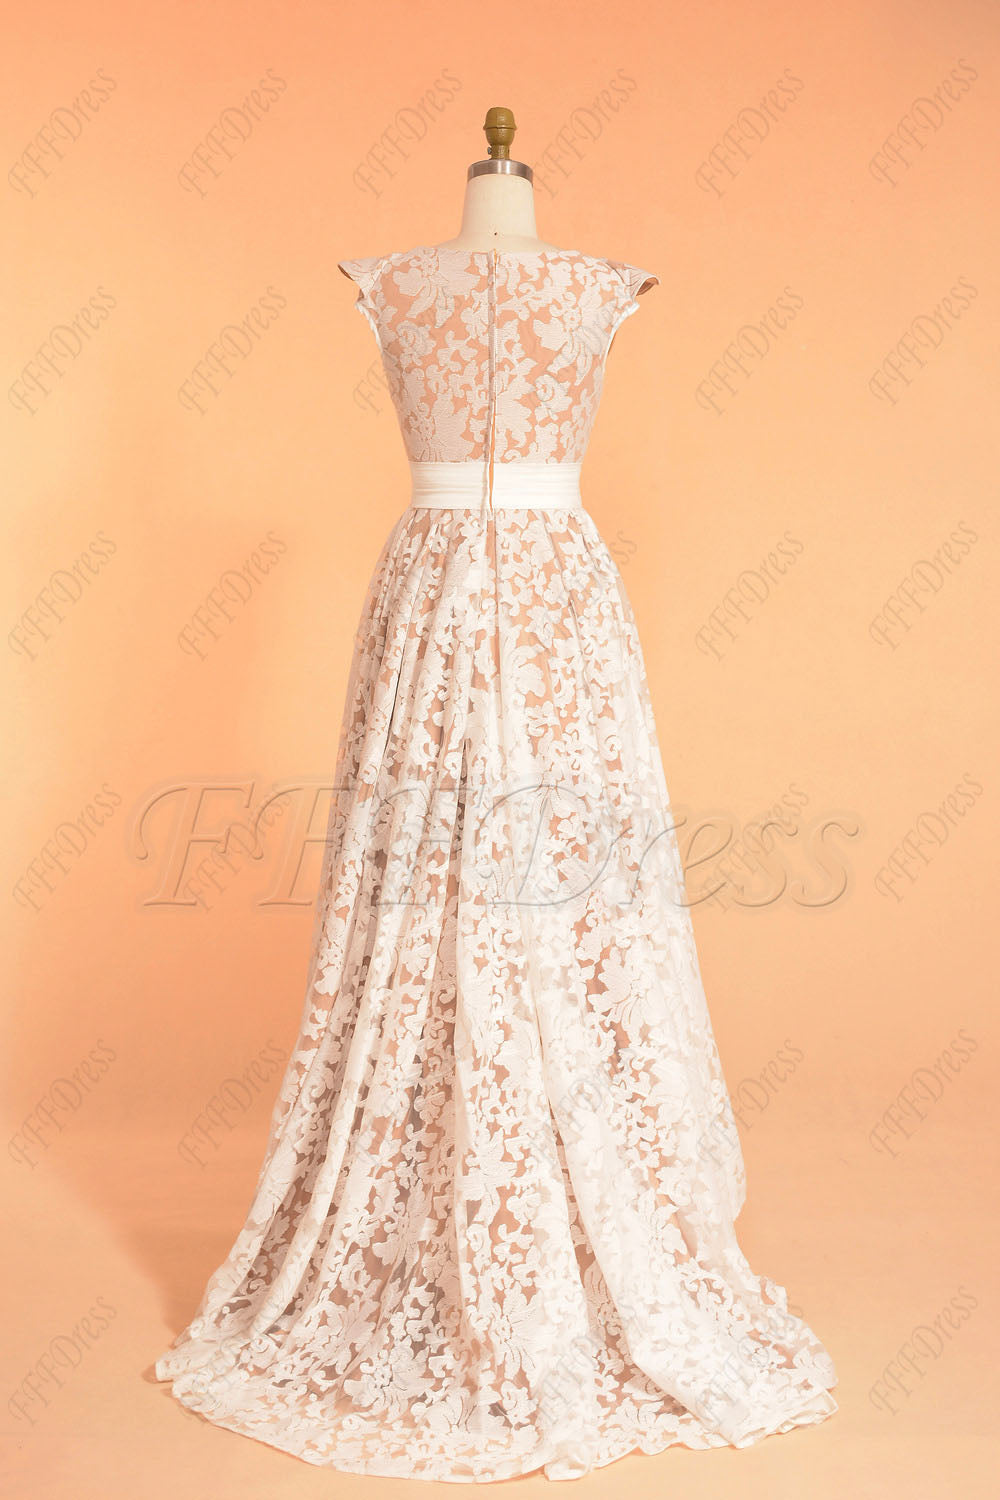 High low modest prom dresses champagne white cap sleeves